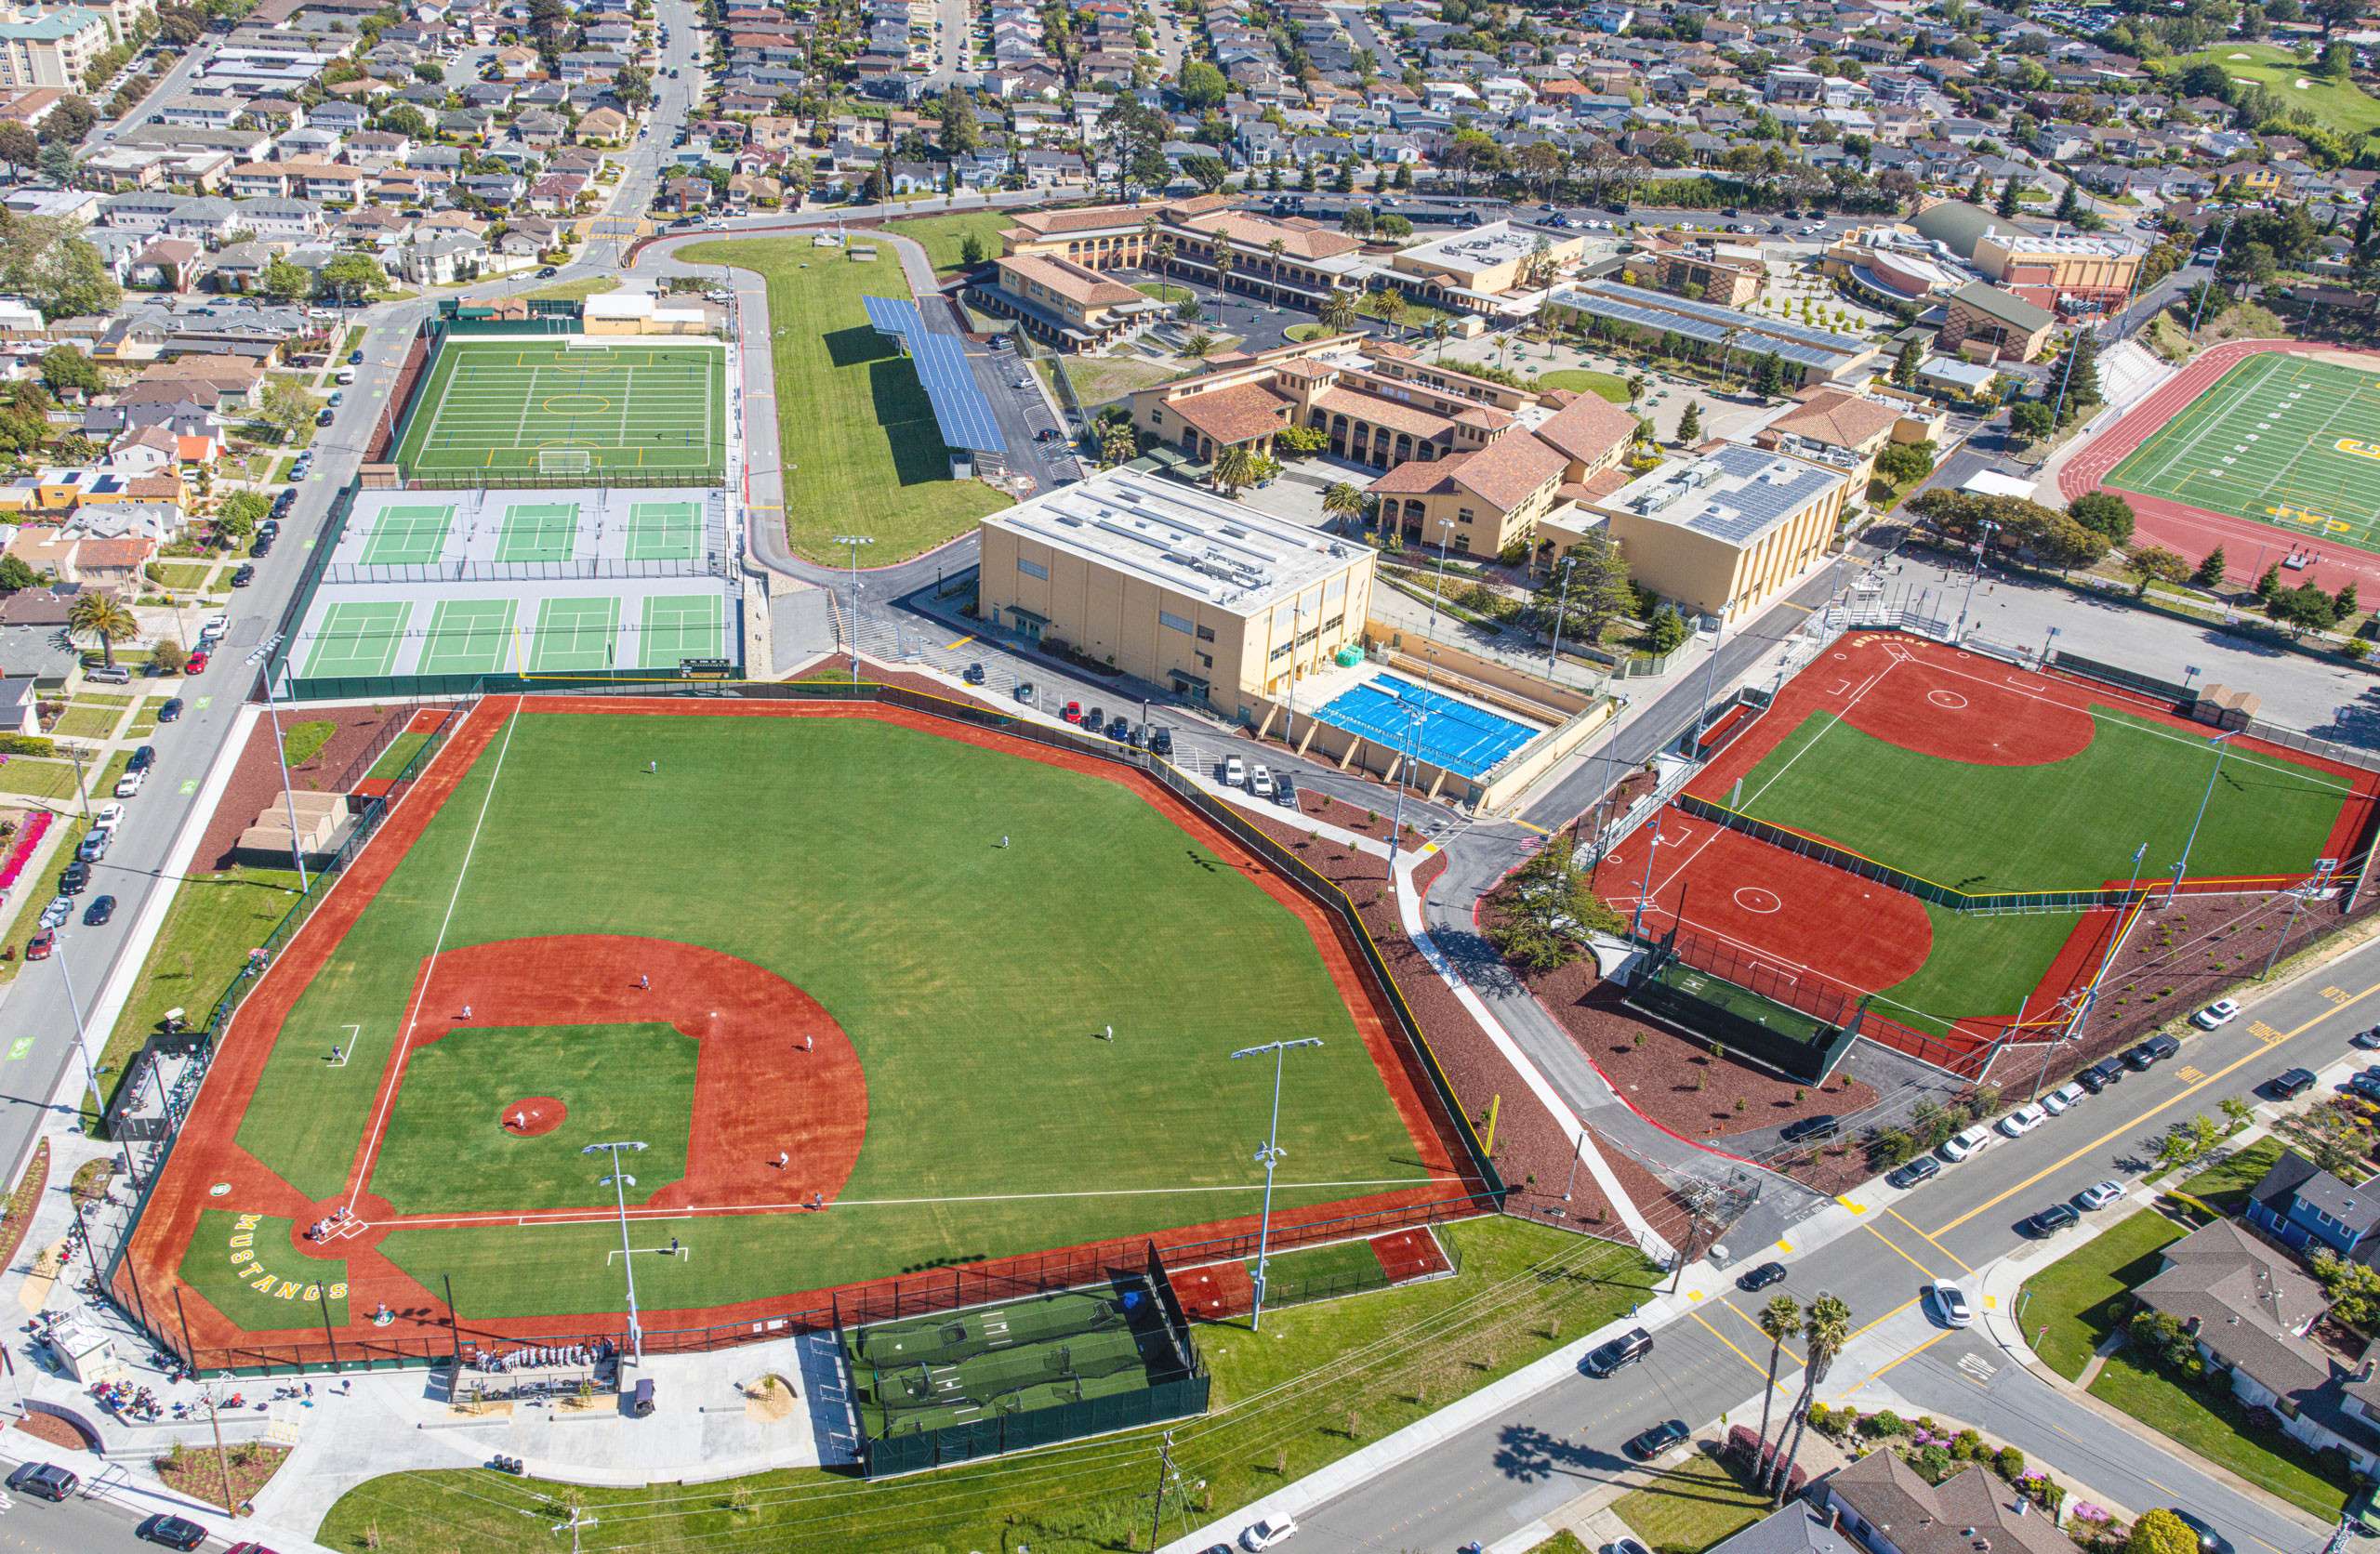 CAPUCHINO HIGH SCHOOL ATHLETIC COMPLEX PROJECT